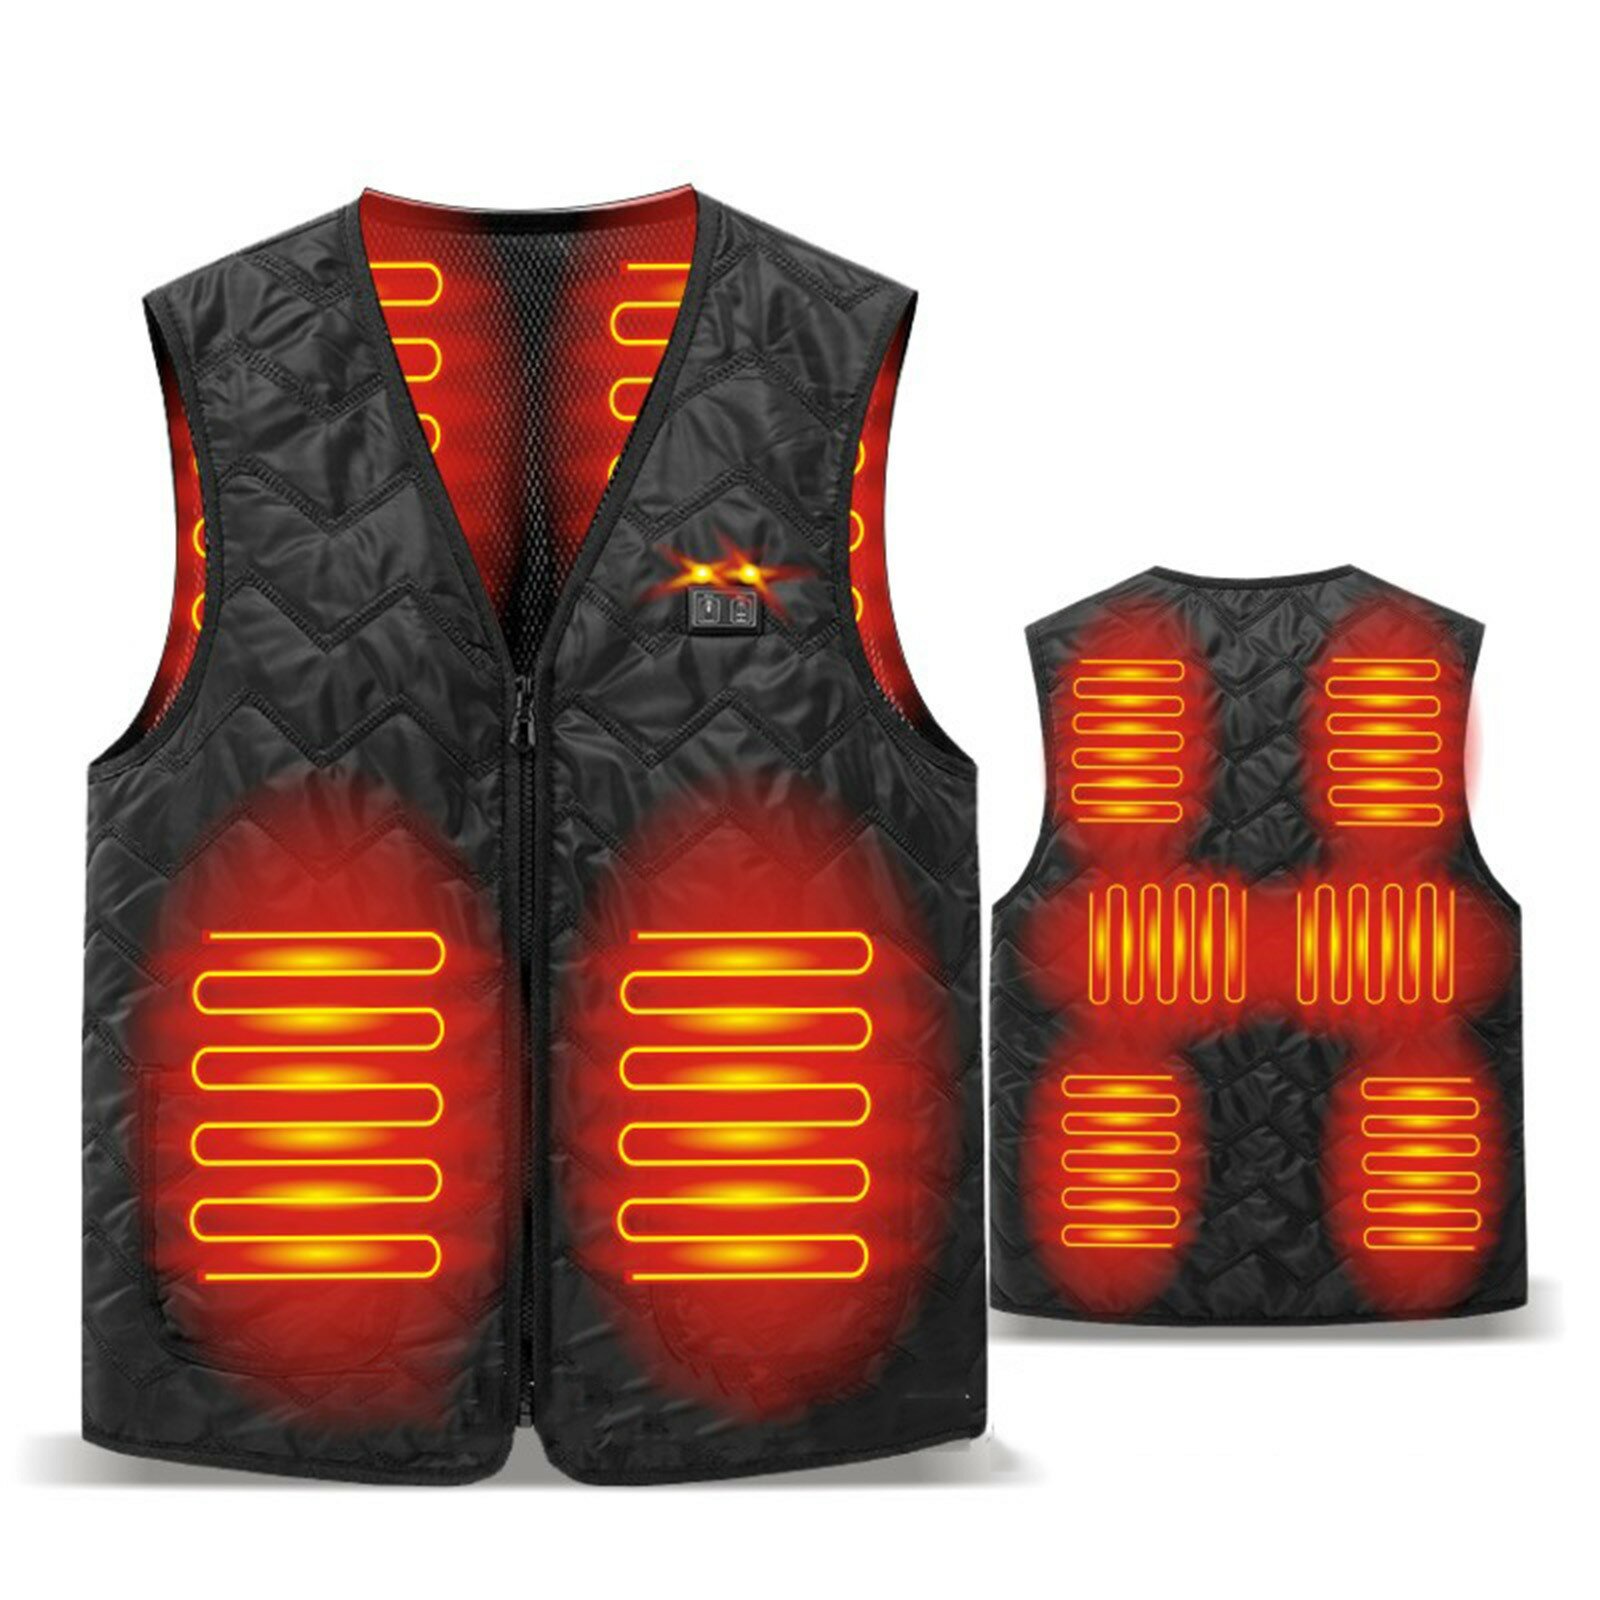 

Charging Vest Clothing Heated Infrared USB Warm Outdoor Via Women Man Fishing Districts Coat Eight Riding Skiing For Coa